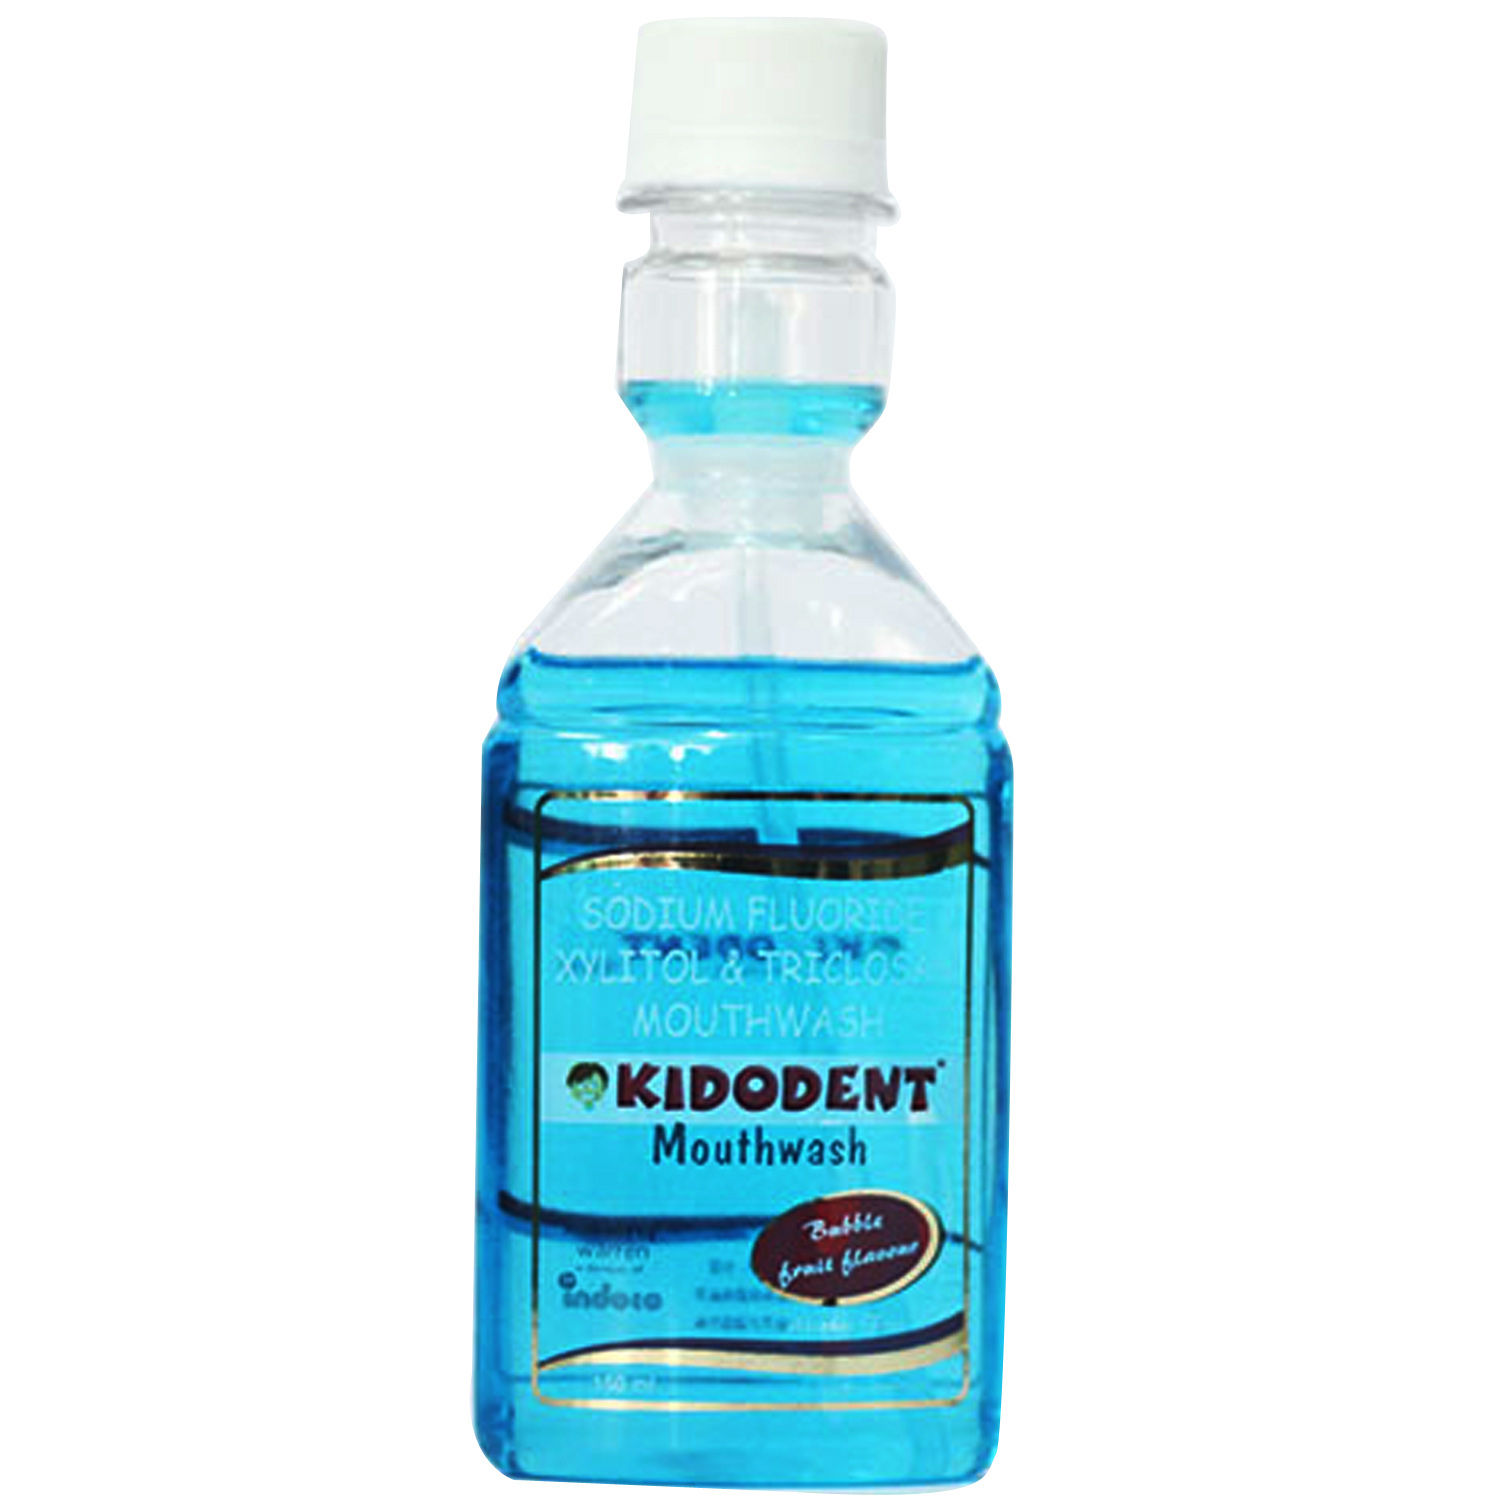 Buy Kidodent Mouthwash, 100 ml Online